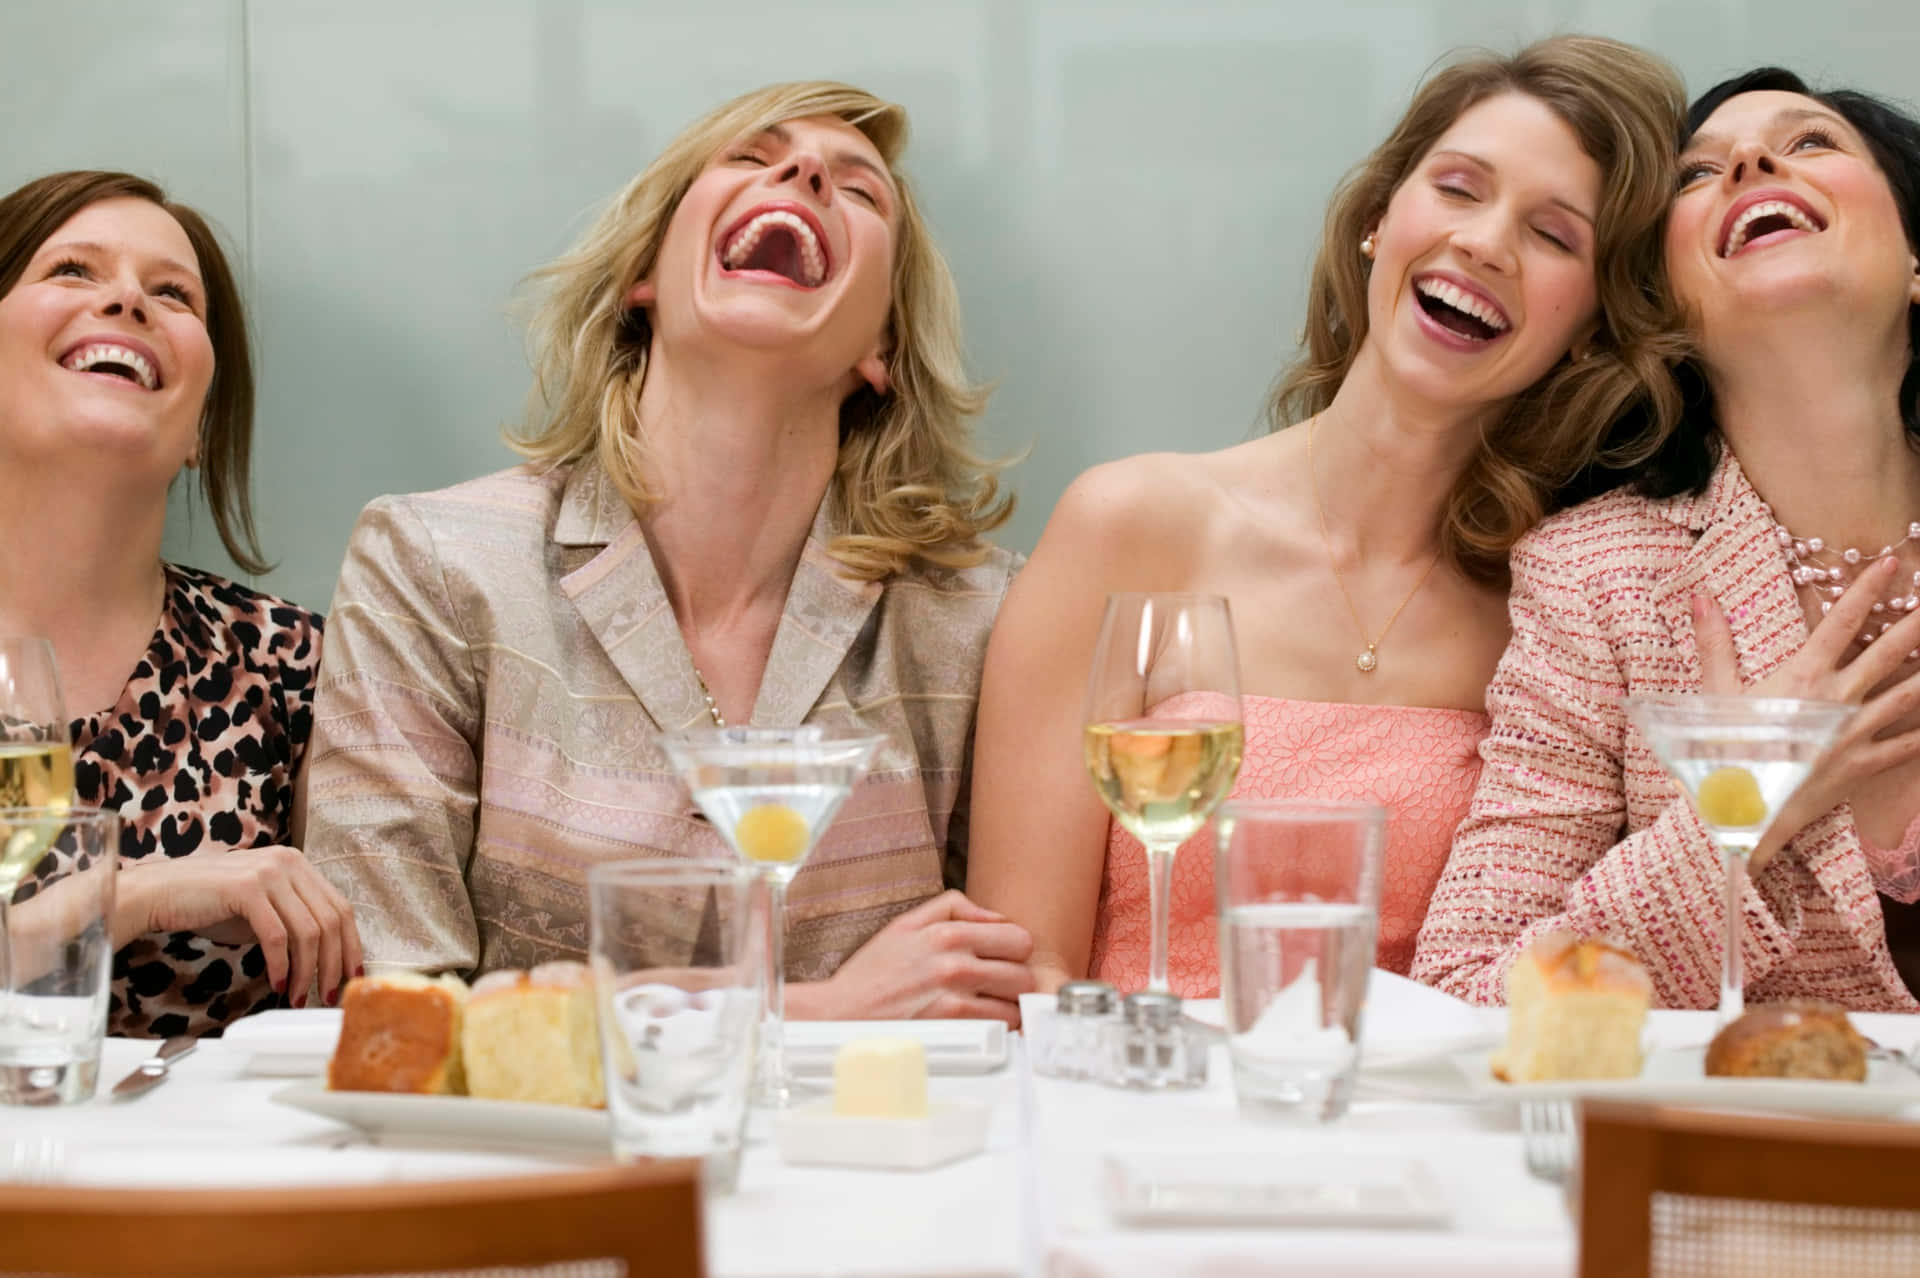 Women Laughing At A Table With Wine And Food